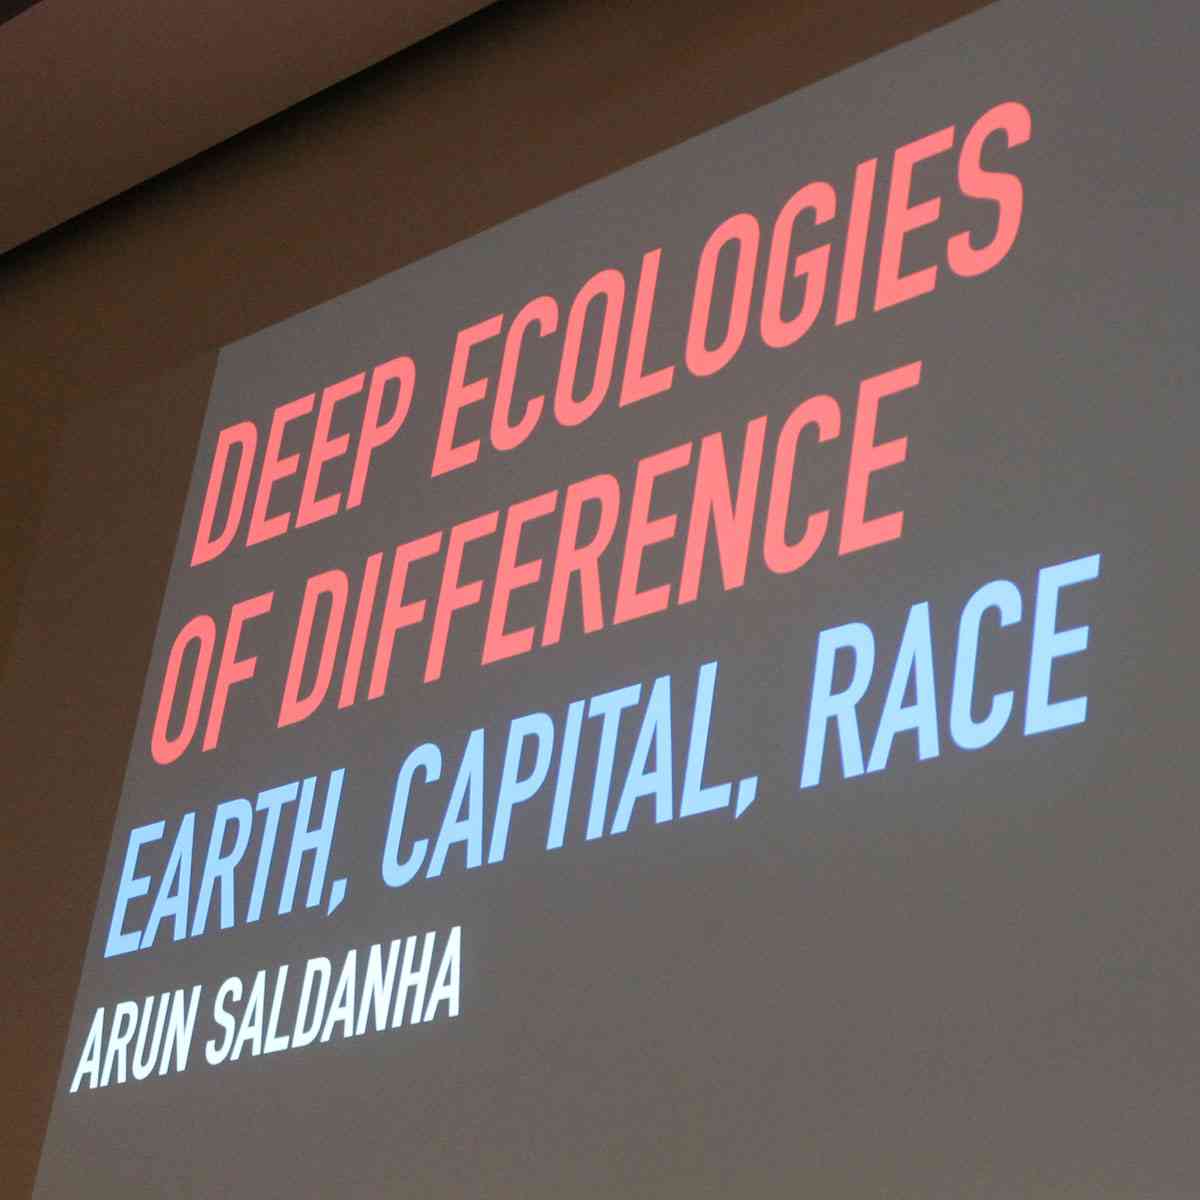 Arun Saldanha - Professor Arun Saldanha (University of Minnesota) has been teaching at the Department of Geography since 2004. From 2016-18 he is Image Fund Arts, Design and Humanities Chair. 